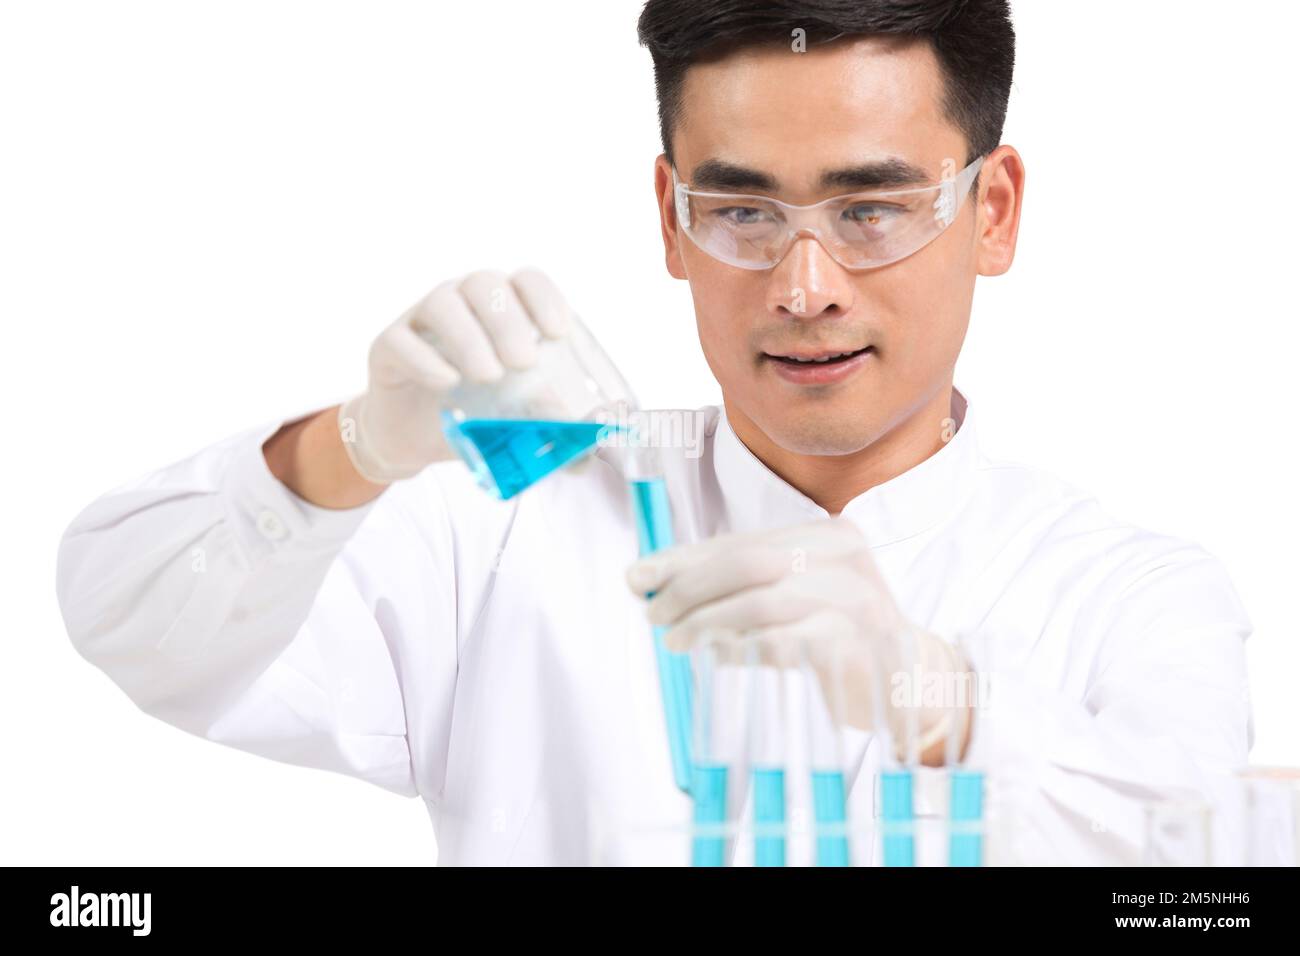 The reagent male scientists observed in vitro Stock Photo